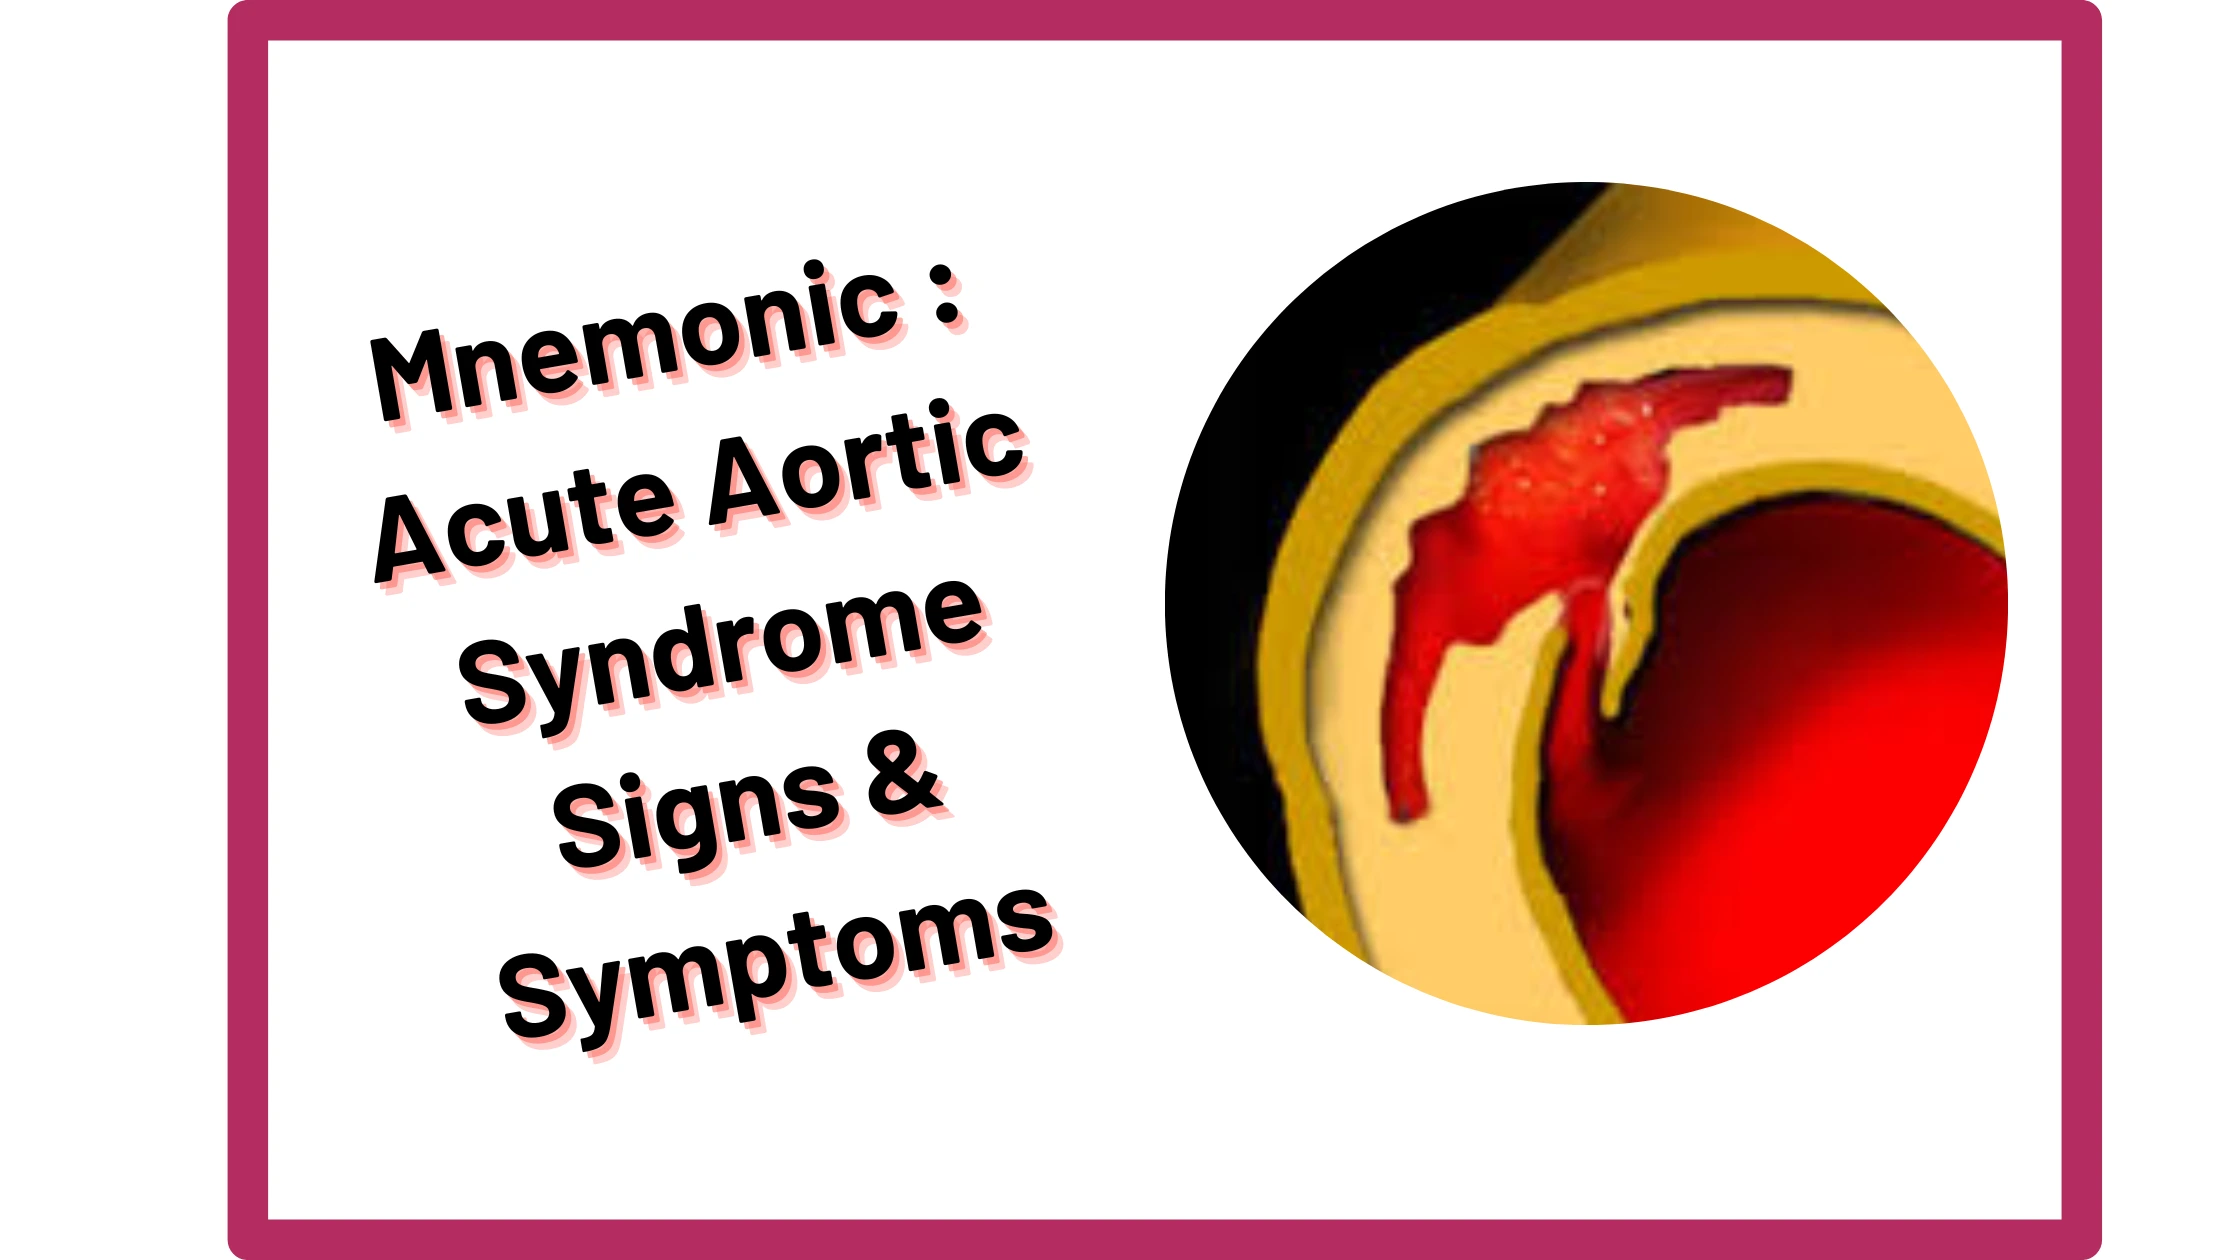 You are currently viewing [Very Cool] Mnemonic : Acute Aortic Syndrome Signs & Symptoms